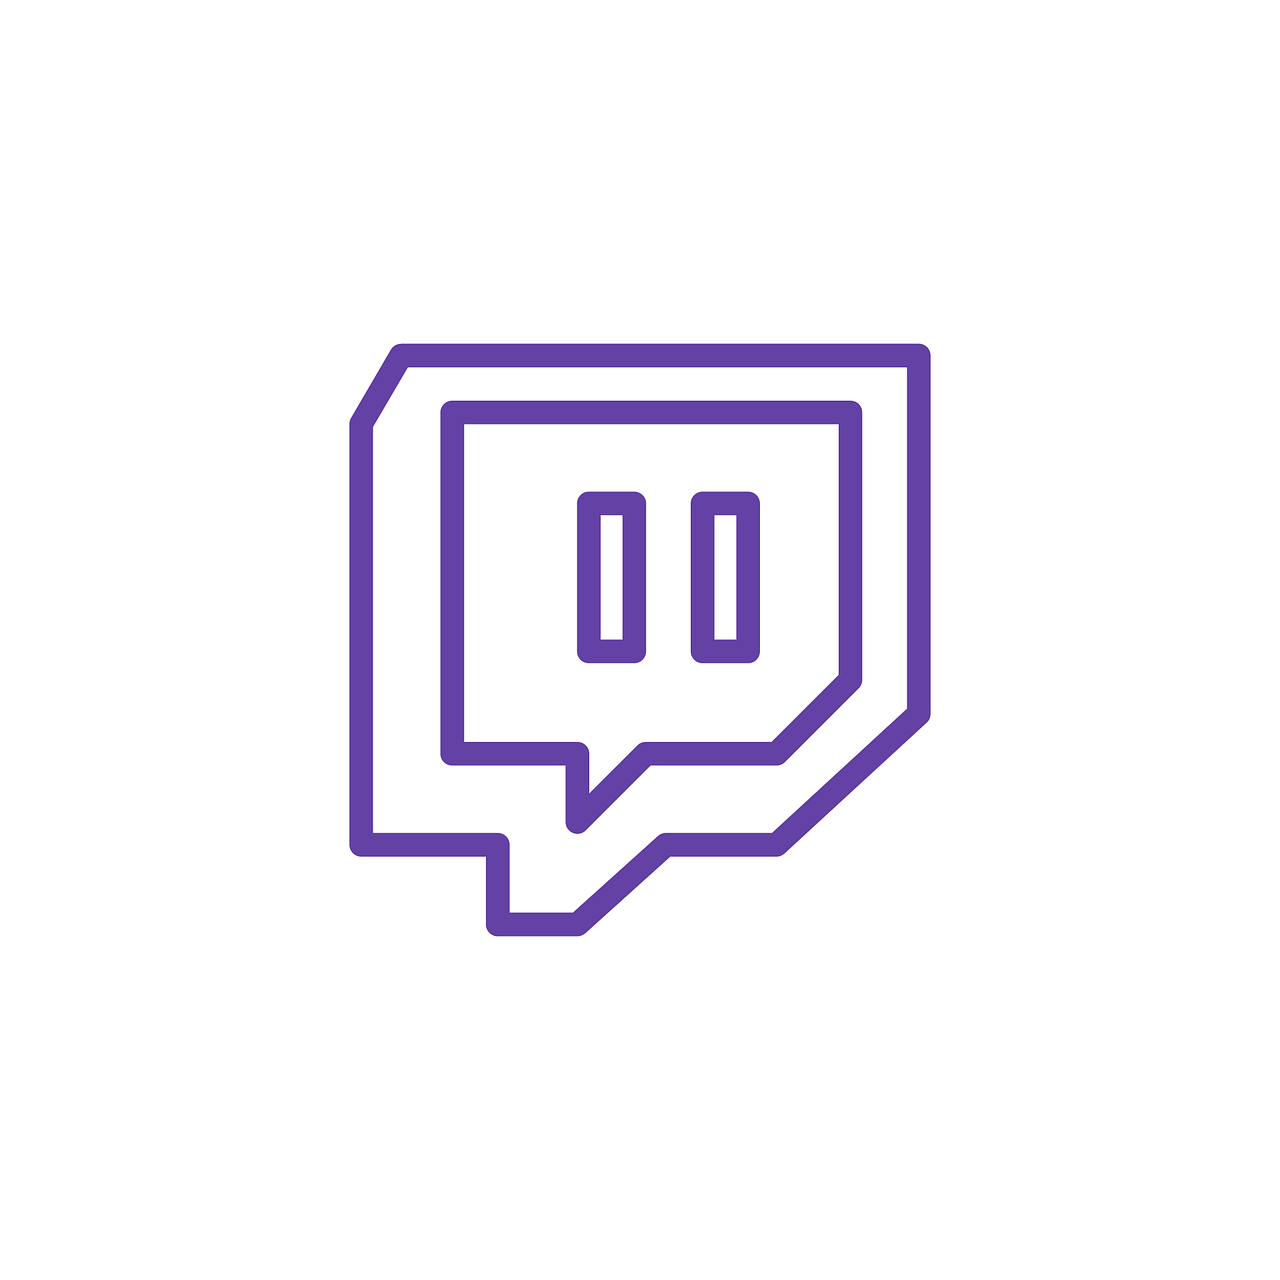 Twitch Icon Logo   Free Vector Graphic On Pixabay - Twitch, Transparent background PNG HD thumbnail